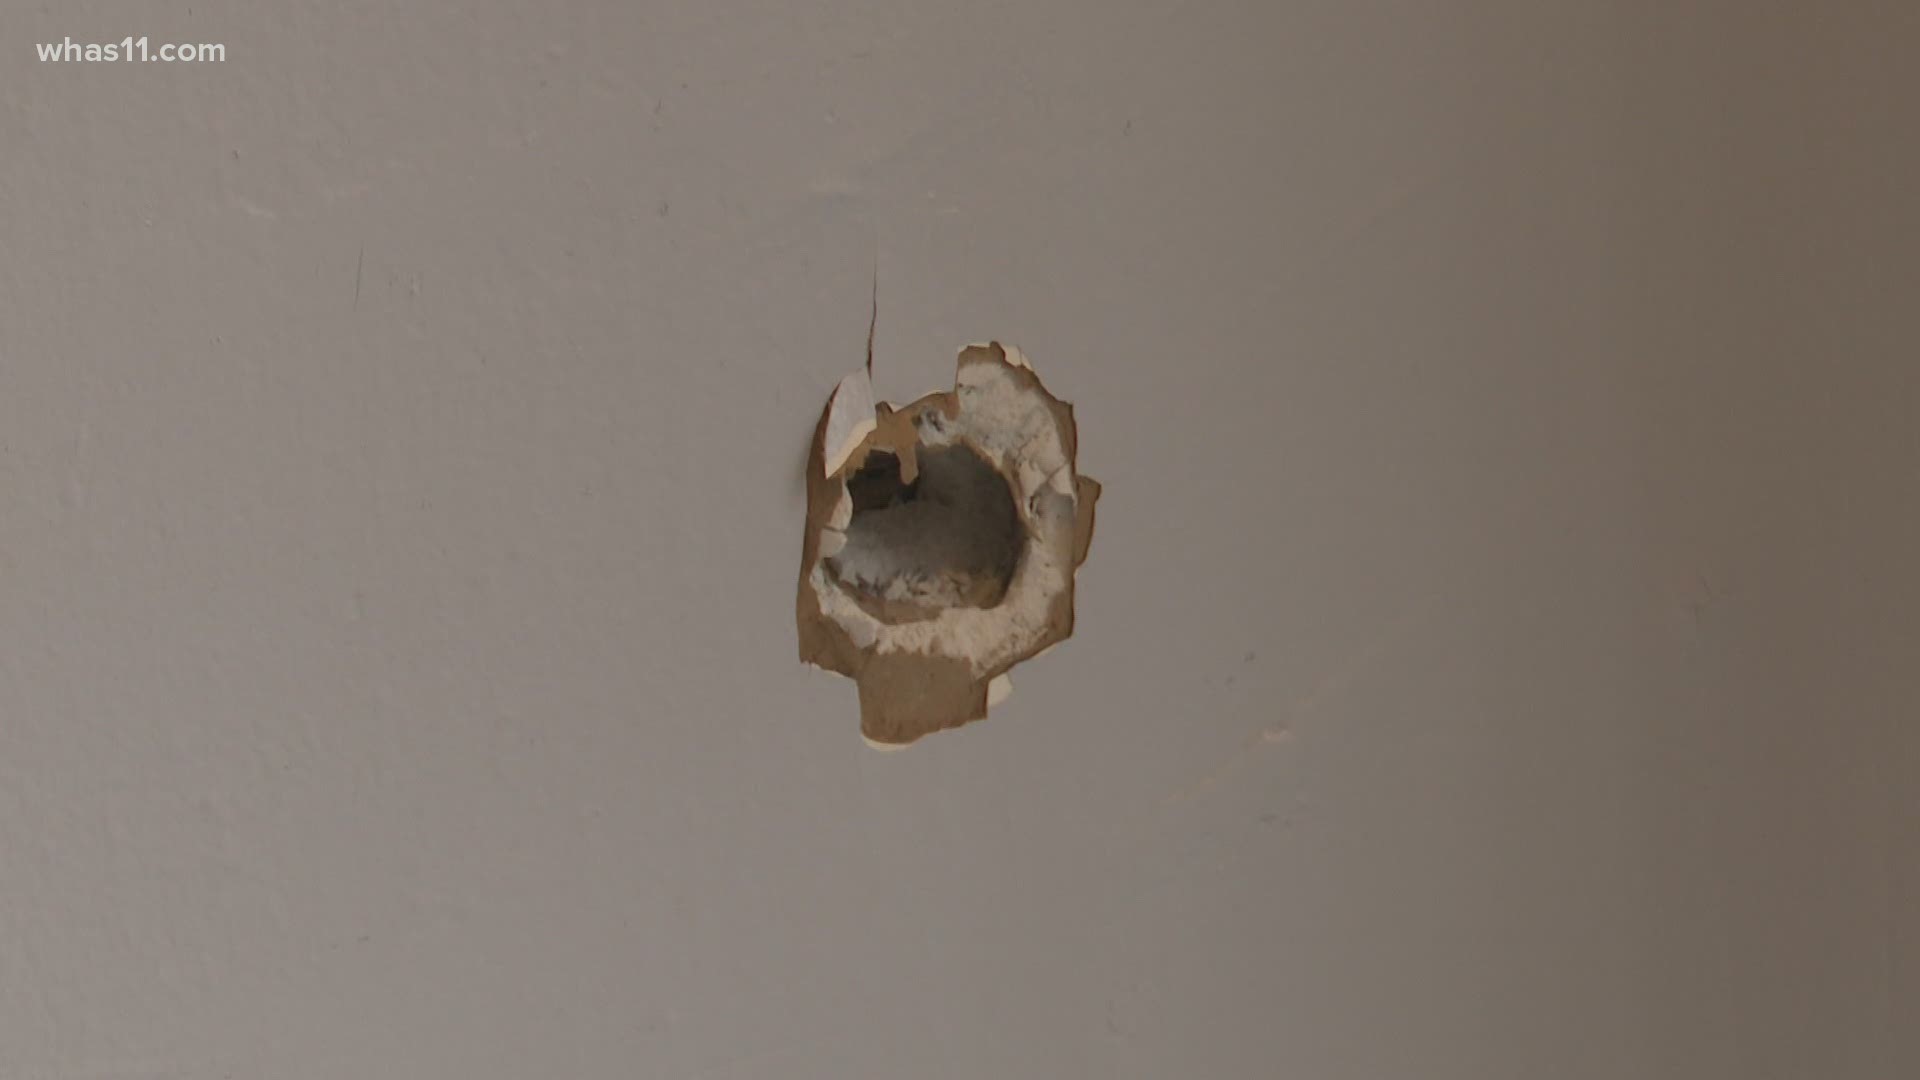 Many are complaining after random gunfire damaged a local nonprofit and a home in Okolona.